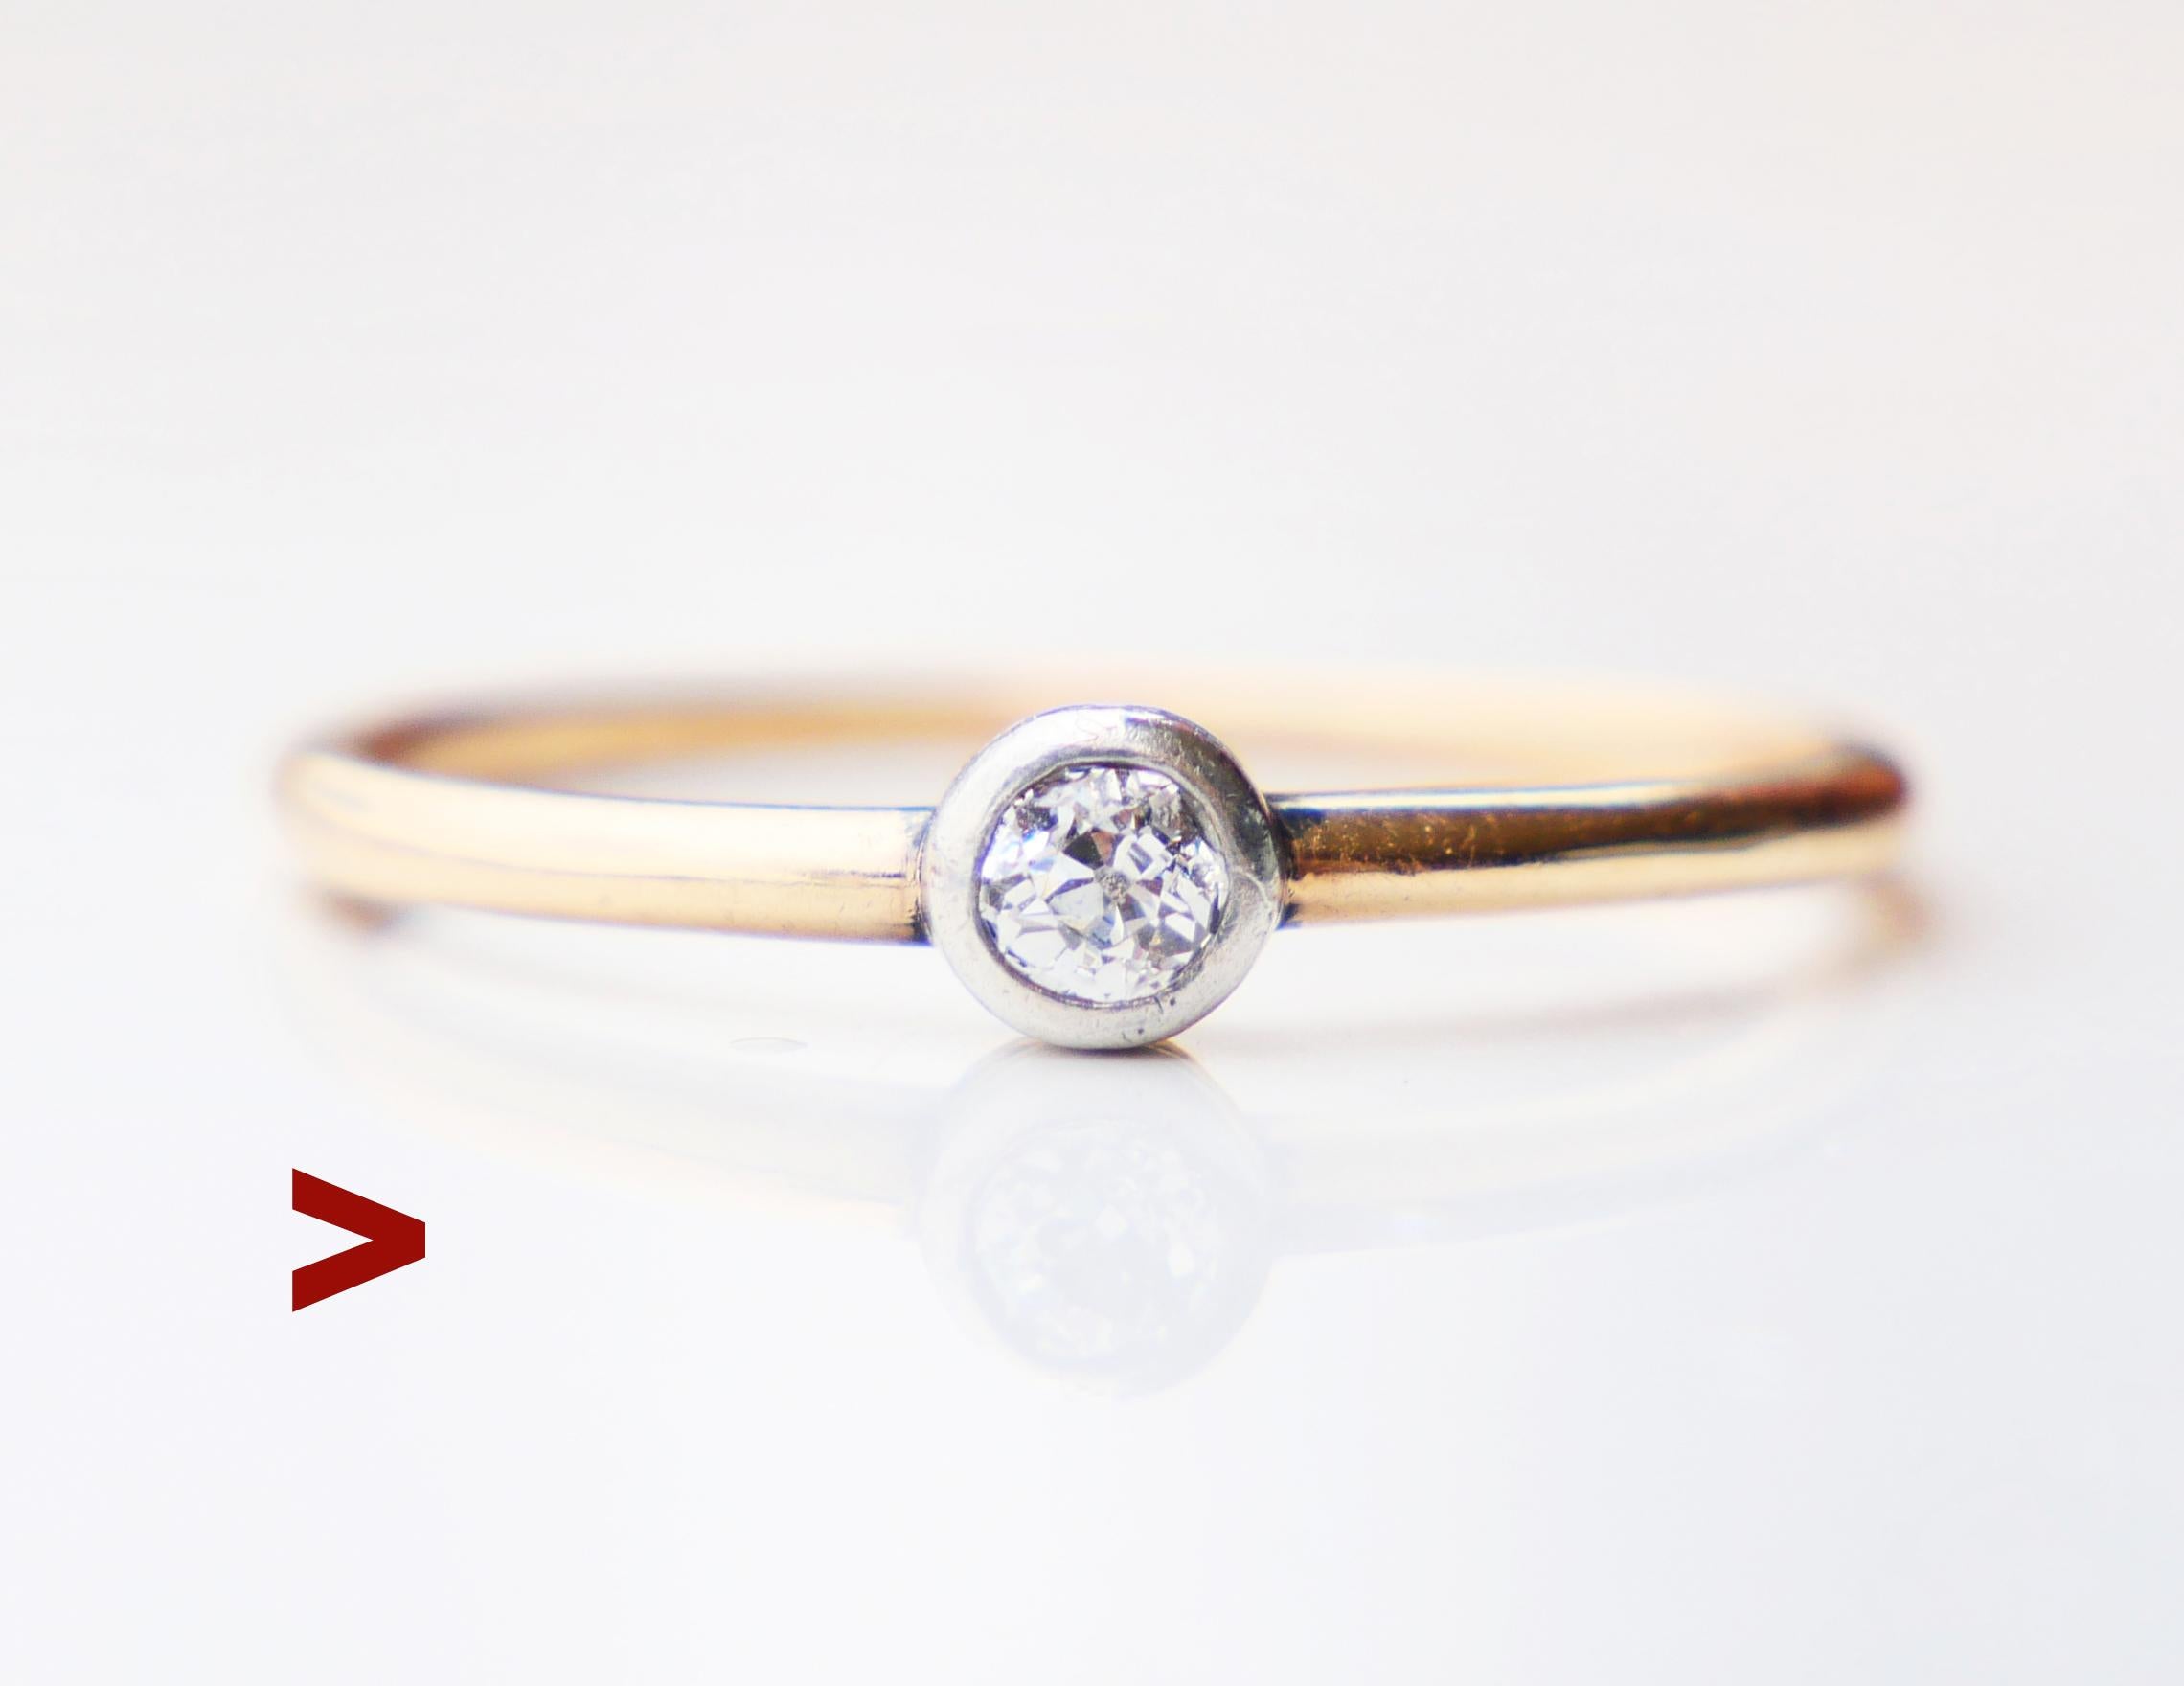 European ring from early XX century period with band in solid 14K Yellow Gold with silver bezel holding a Diamond Ø 3.25 mm x 1.9 mm deep / ca.0.2 ct , color ca,G,H /VS , with open back .

Fragmented hallmarks. Metal tested solid 14K Gold.

Size : Ø